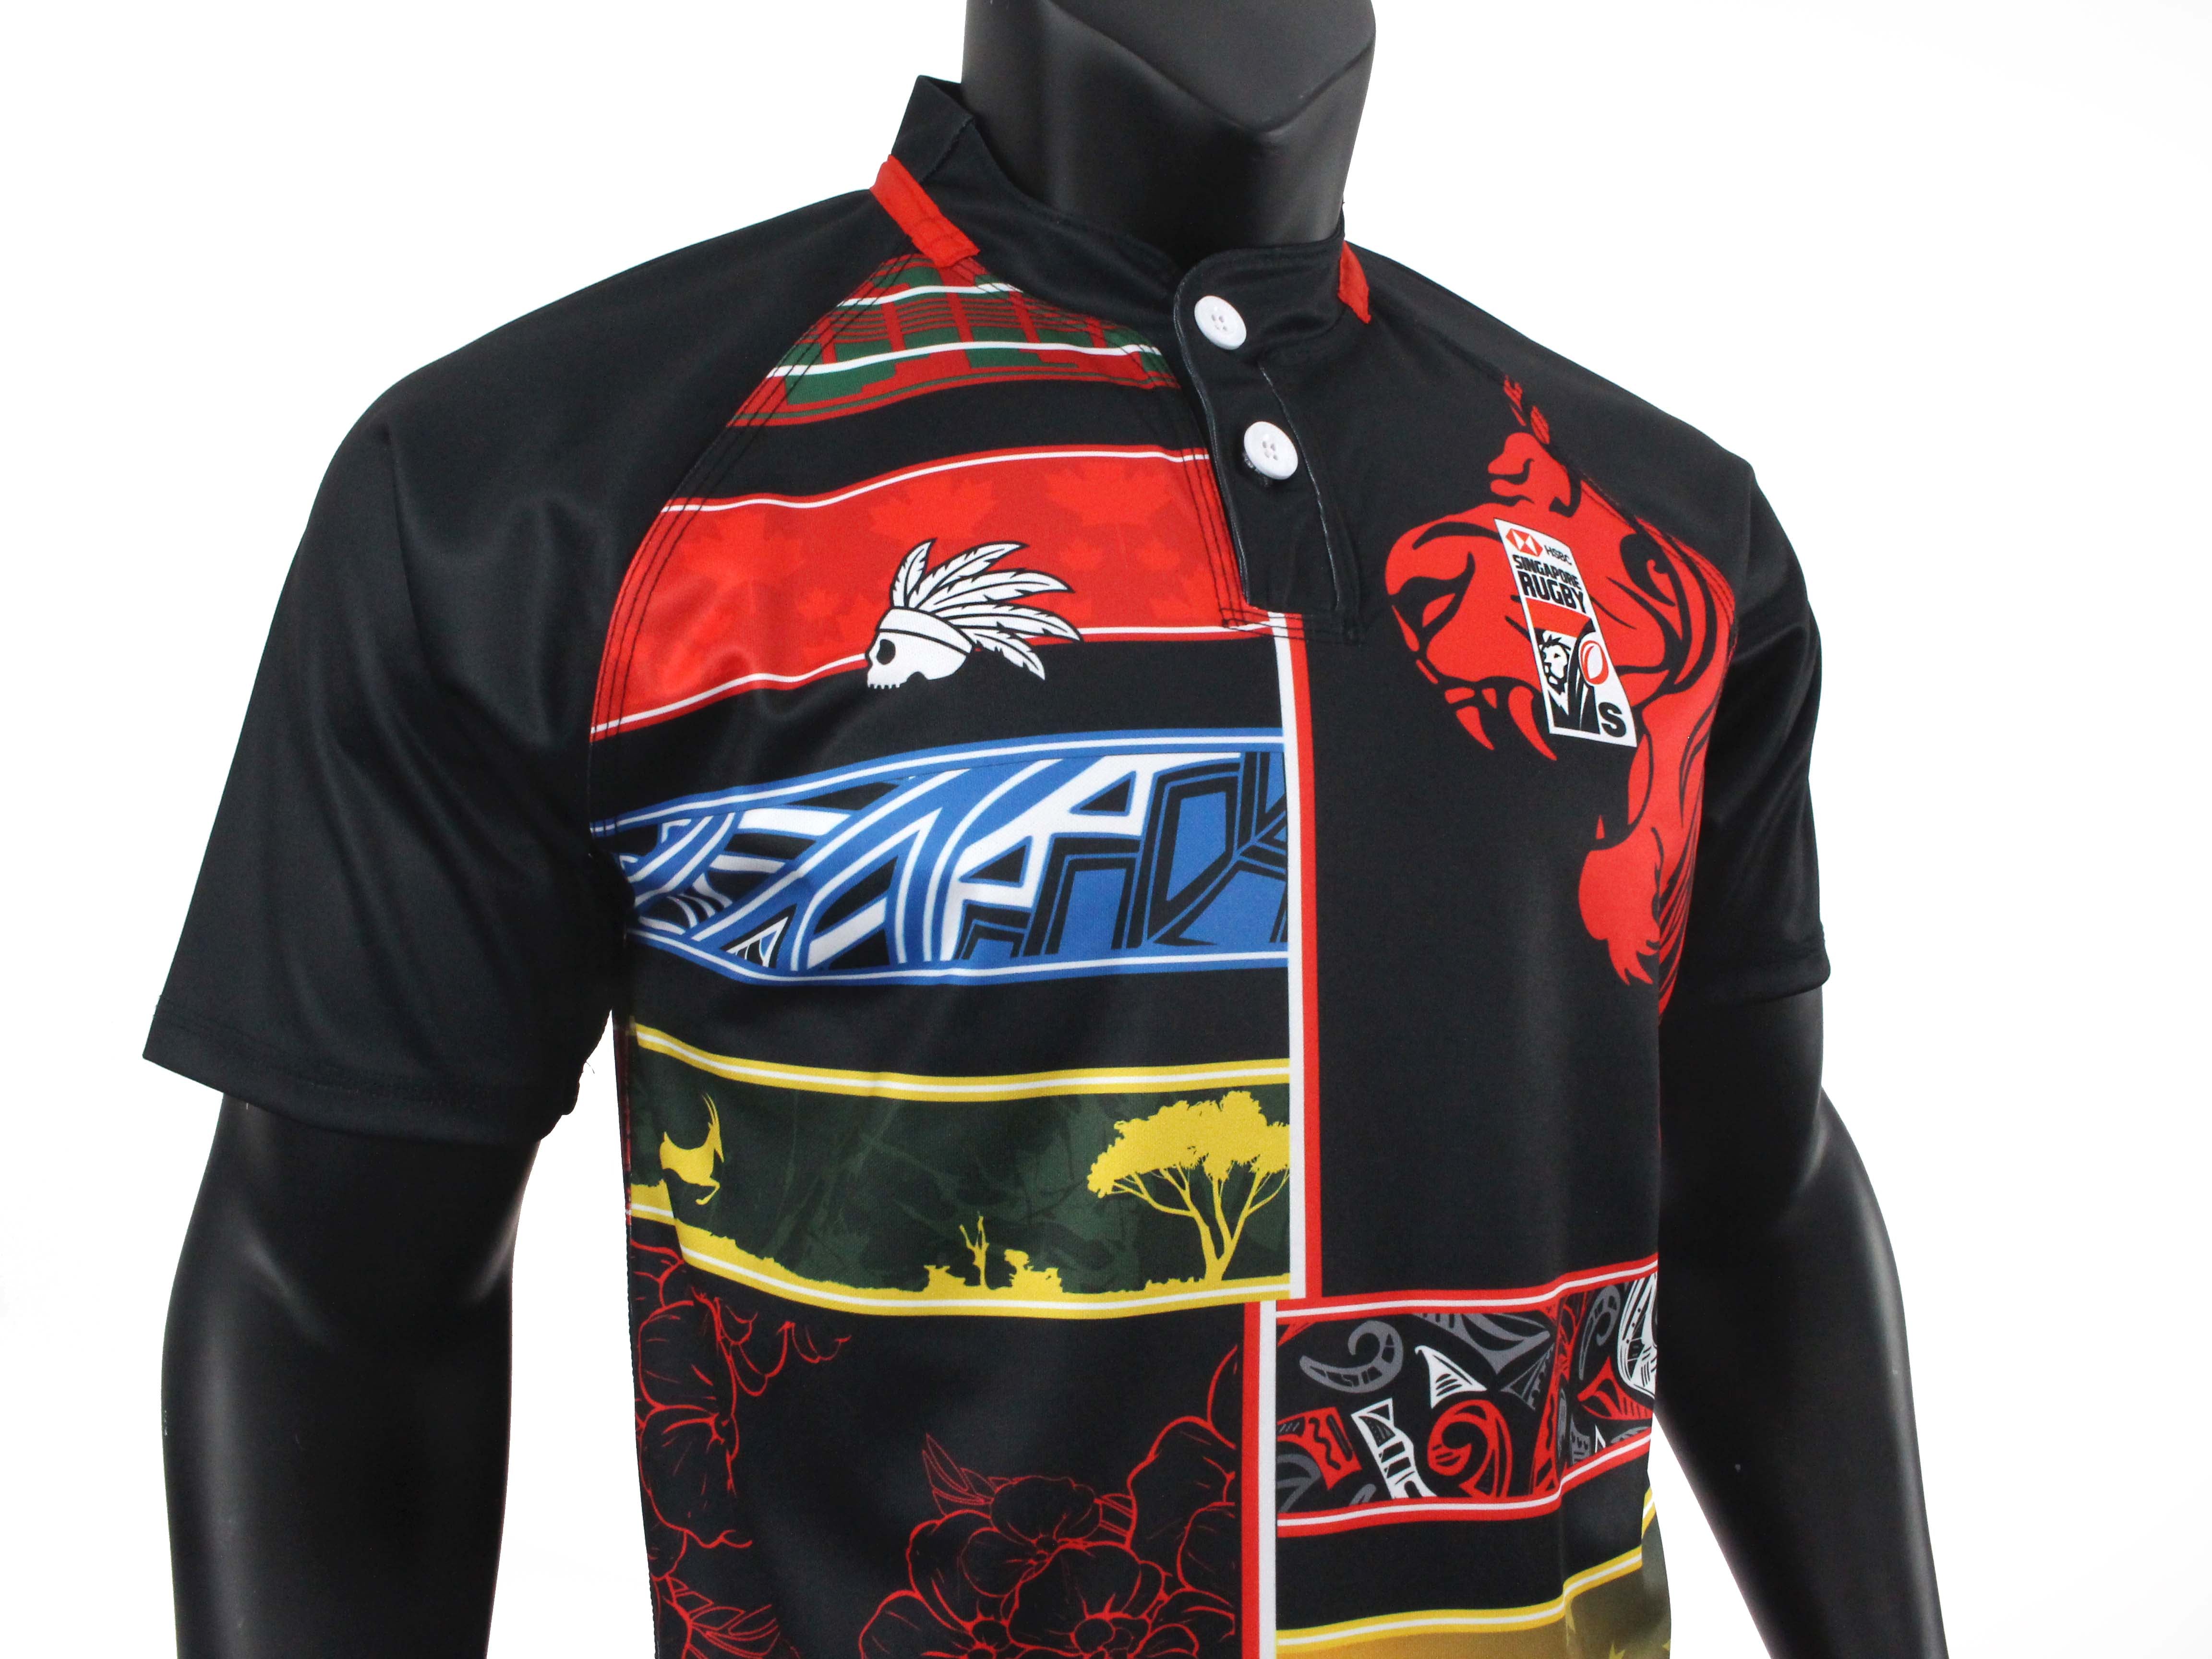 LIMITED RUGBY JERSEY